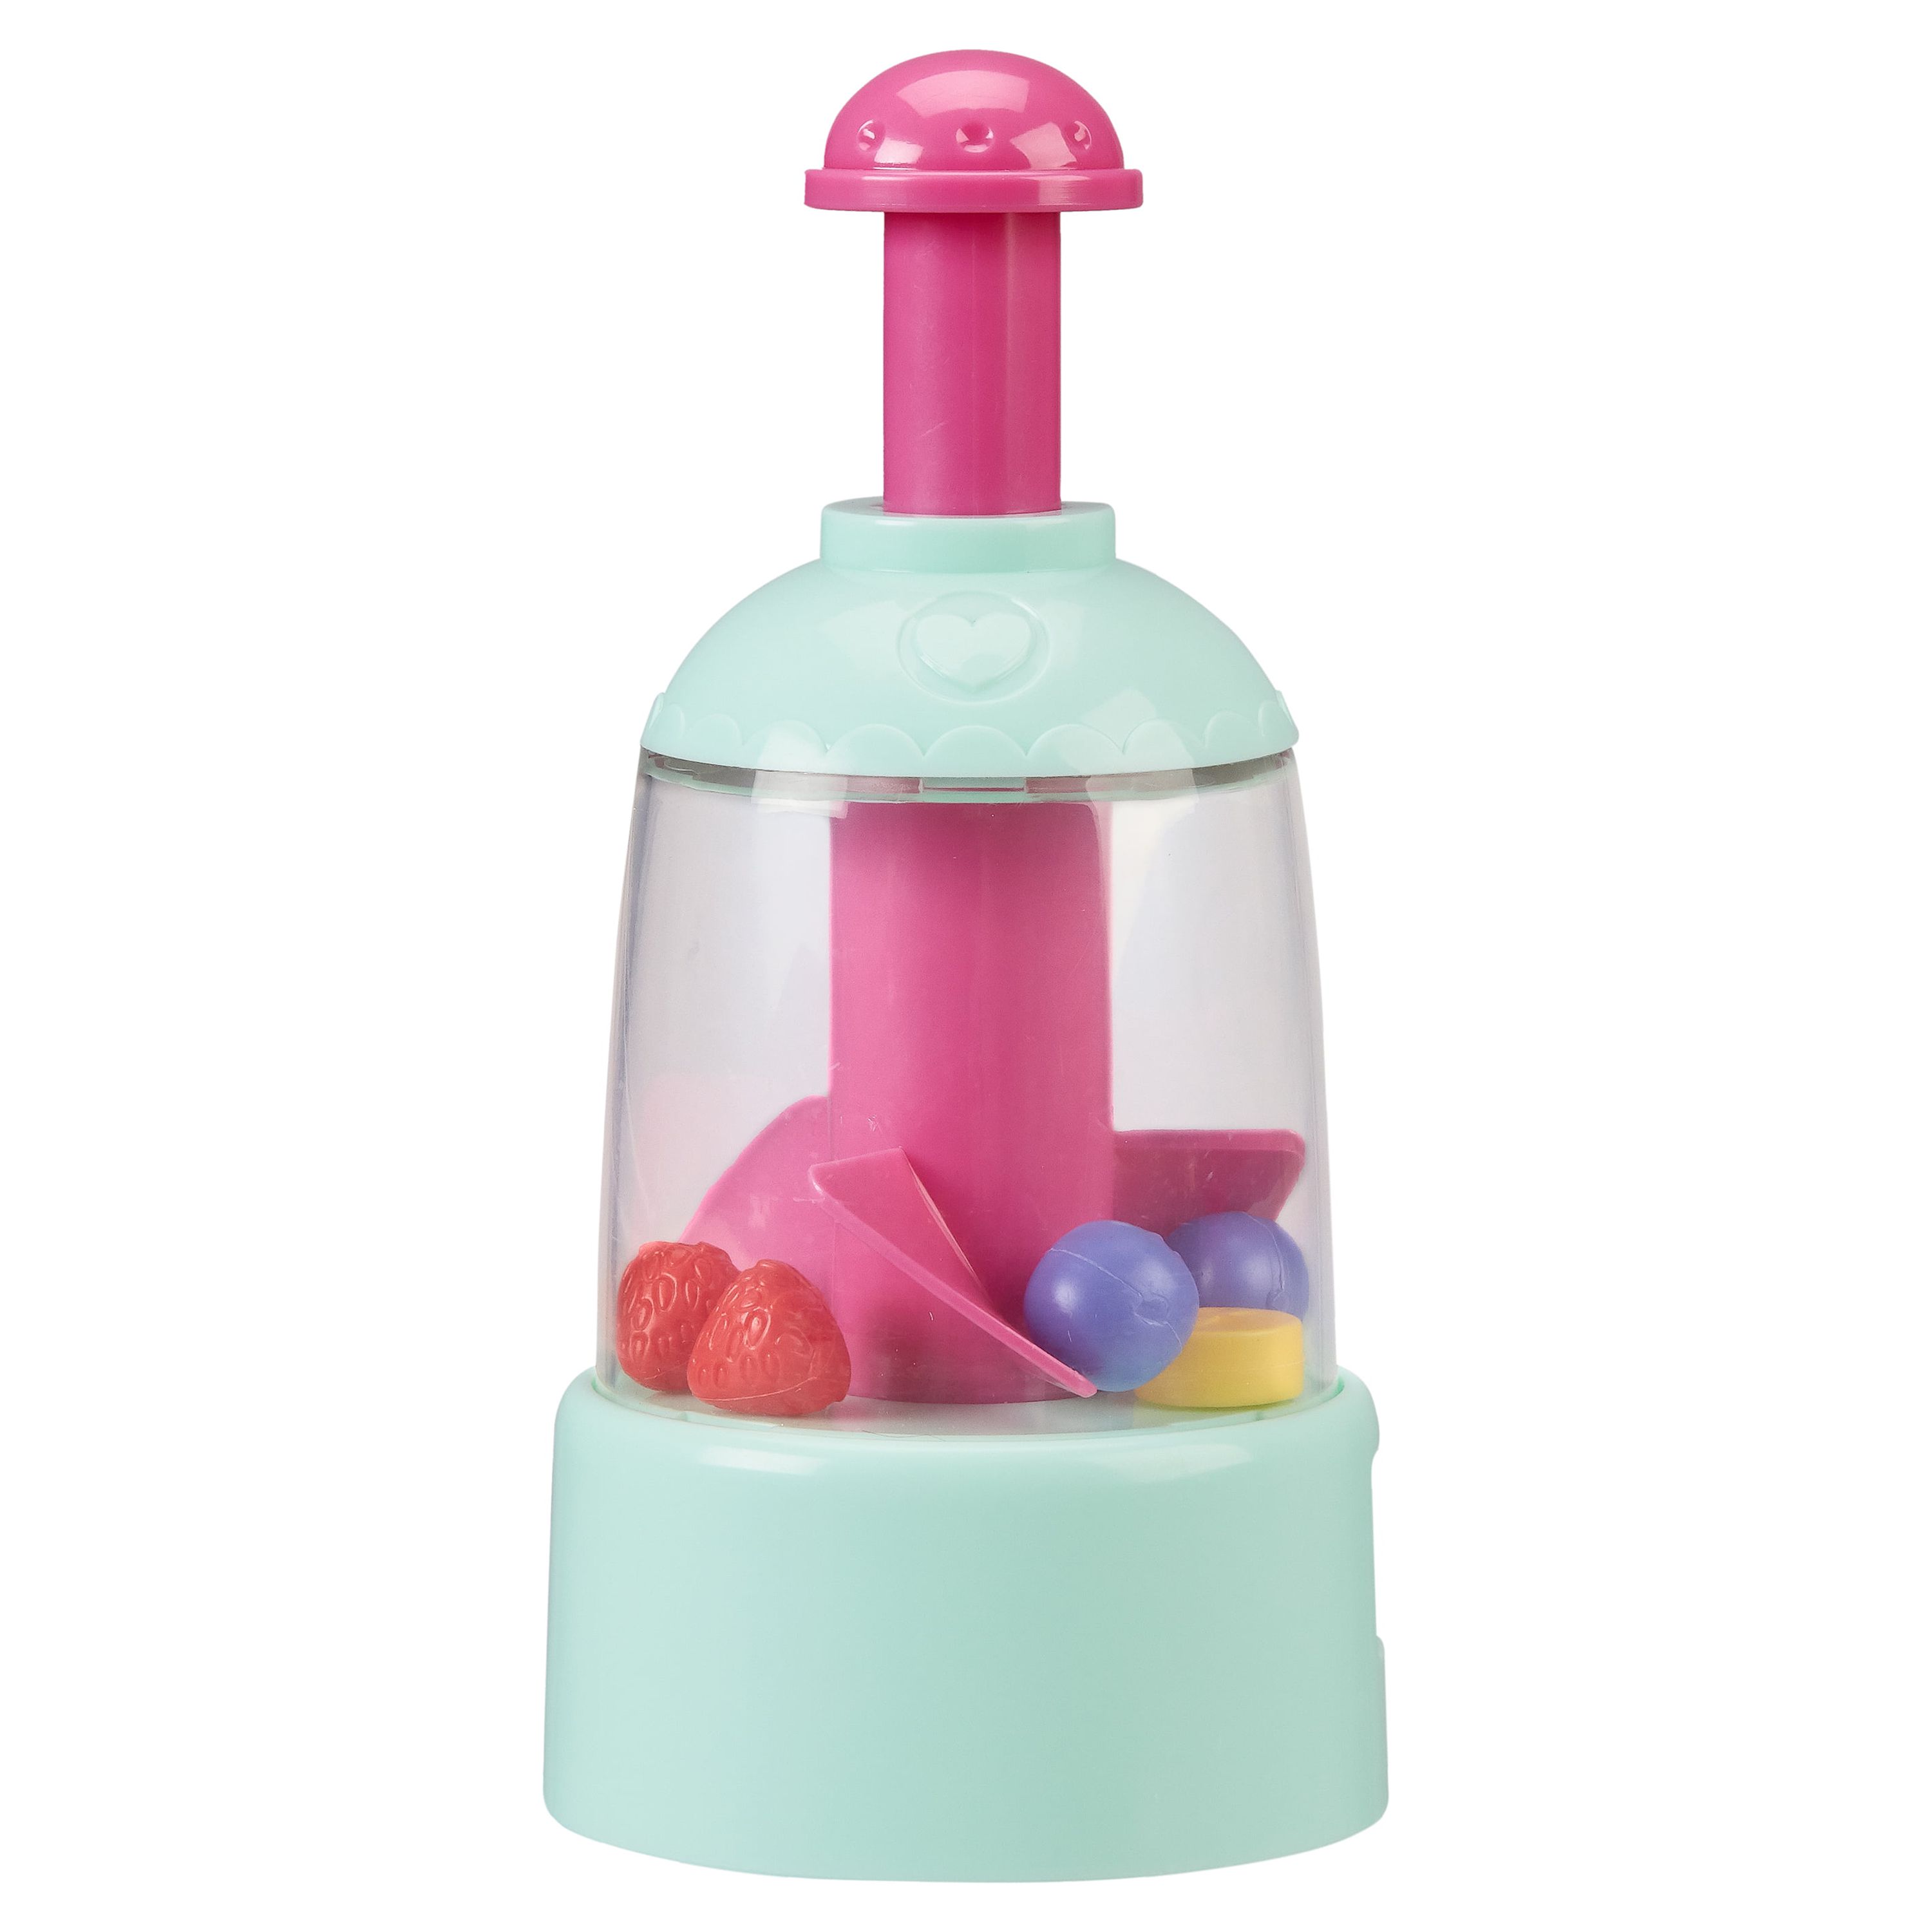 My Sweet Love Food Blender Toy Accessory Play Set, 9 Pieces - image 3 of 5